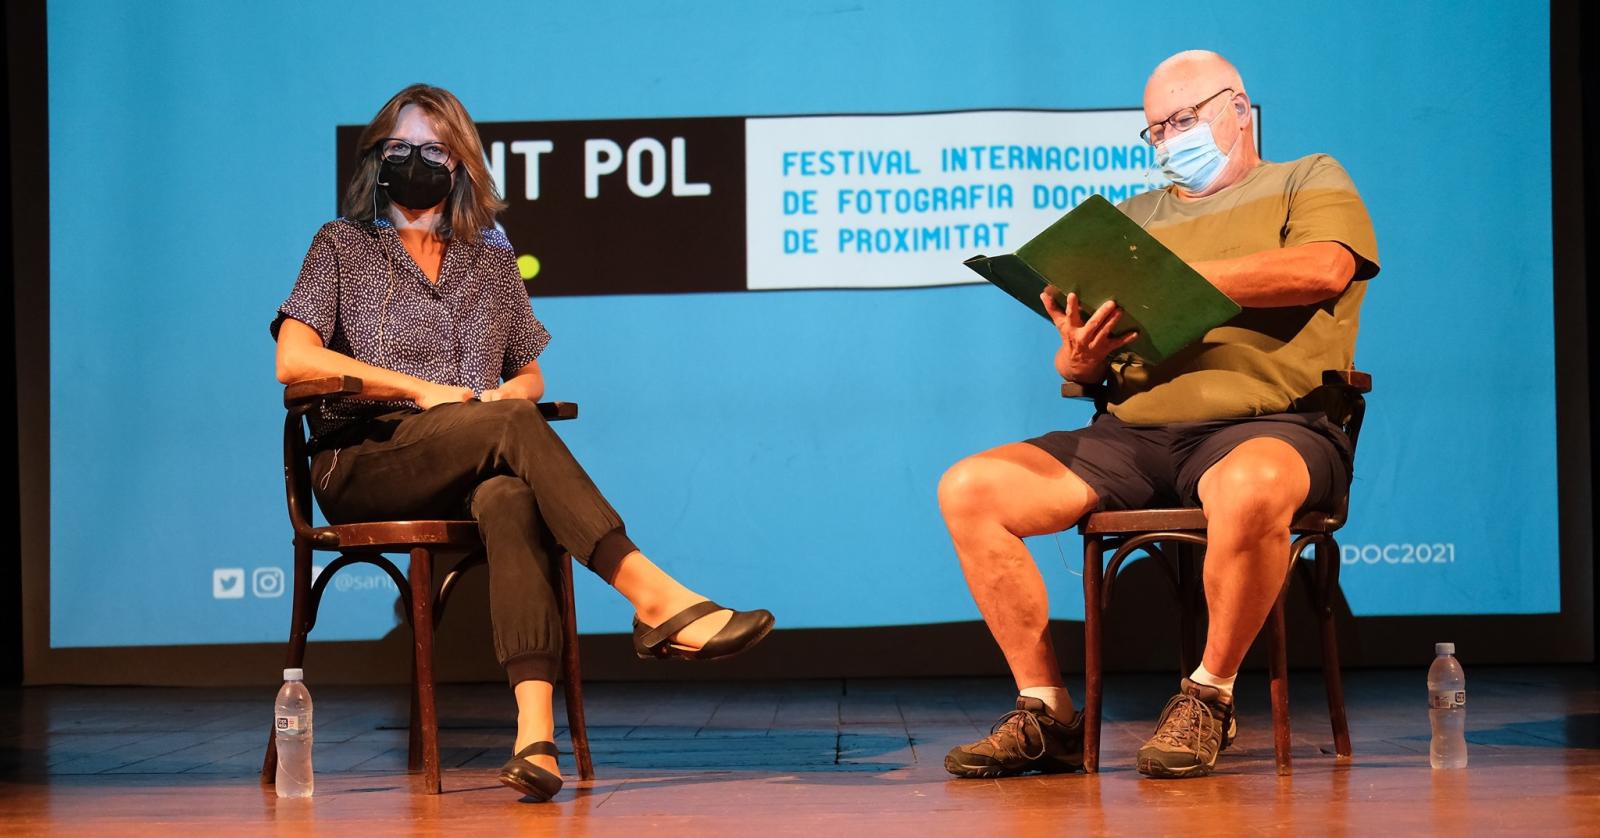 Conference at the Sant Pol Doc Festival